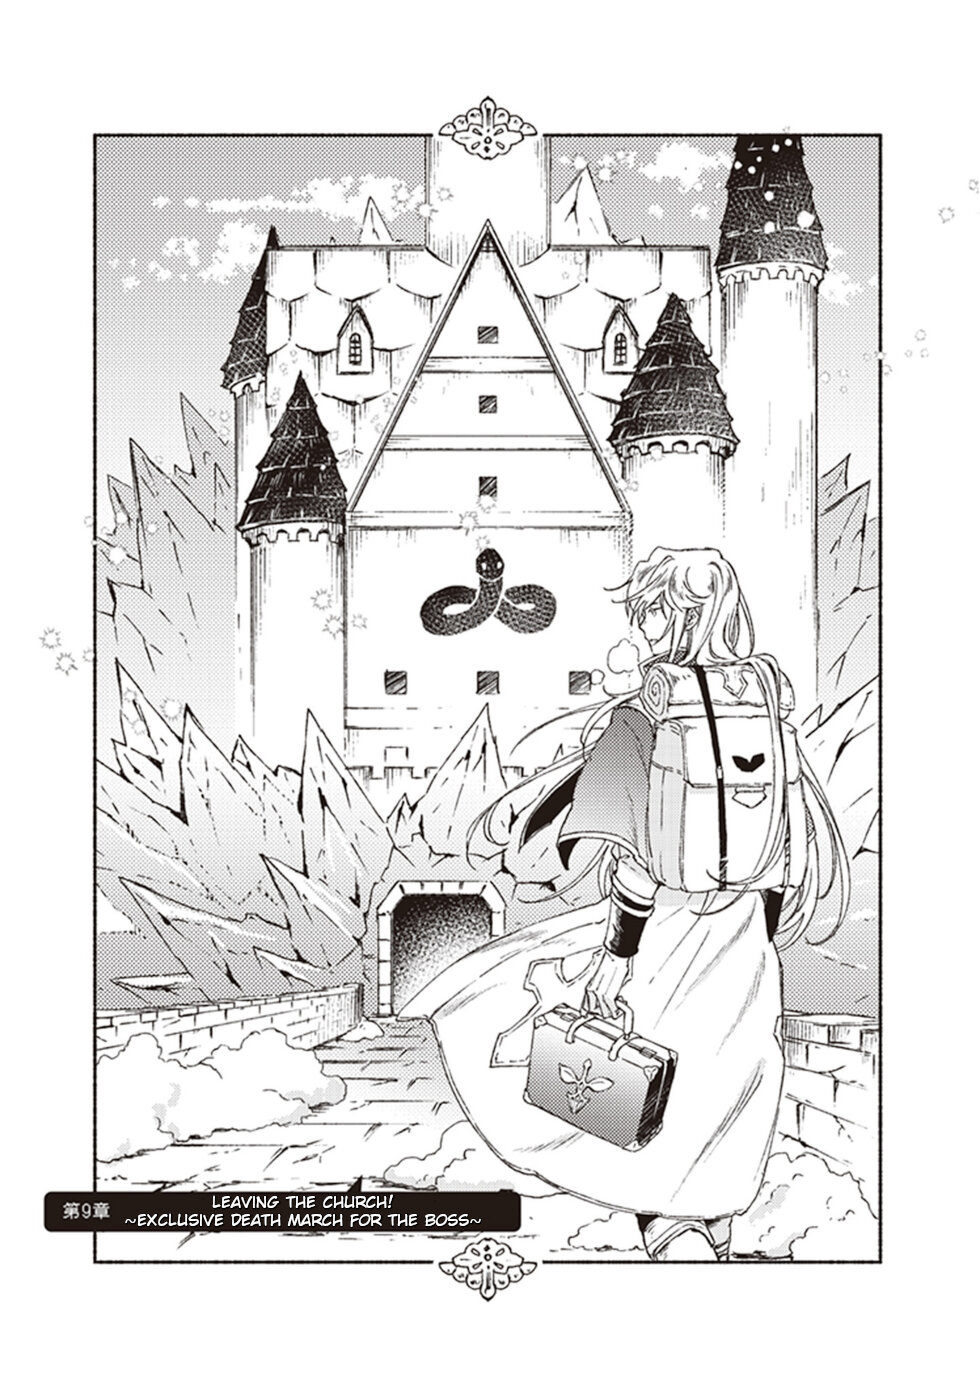 The Church in Front of the Devil’s Castle Vol. 2 Ch. 9 Leaving The Church! ~Exclusive Death March For The Boss~